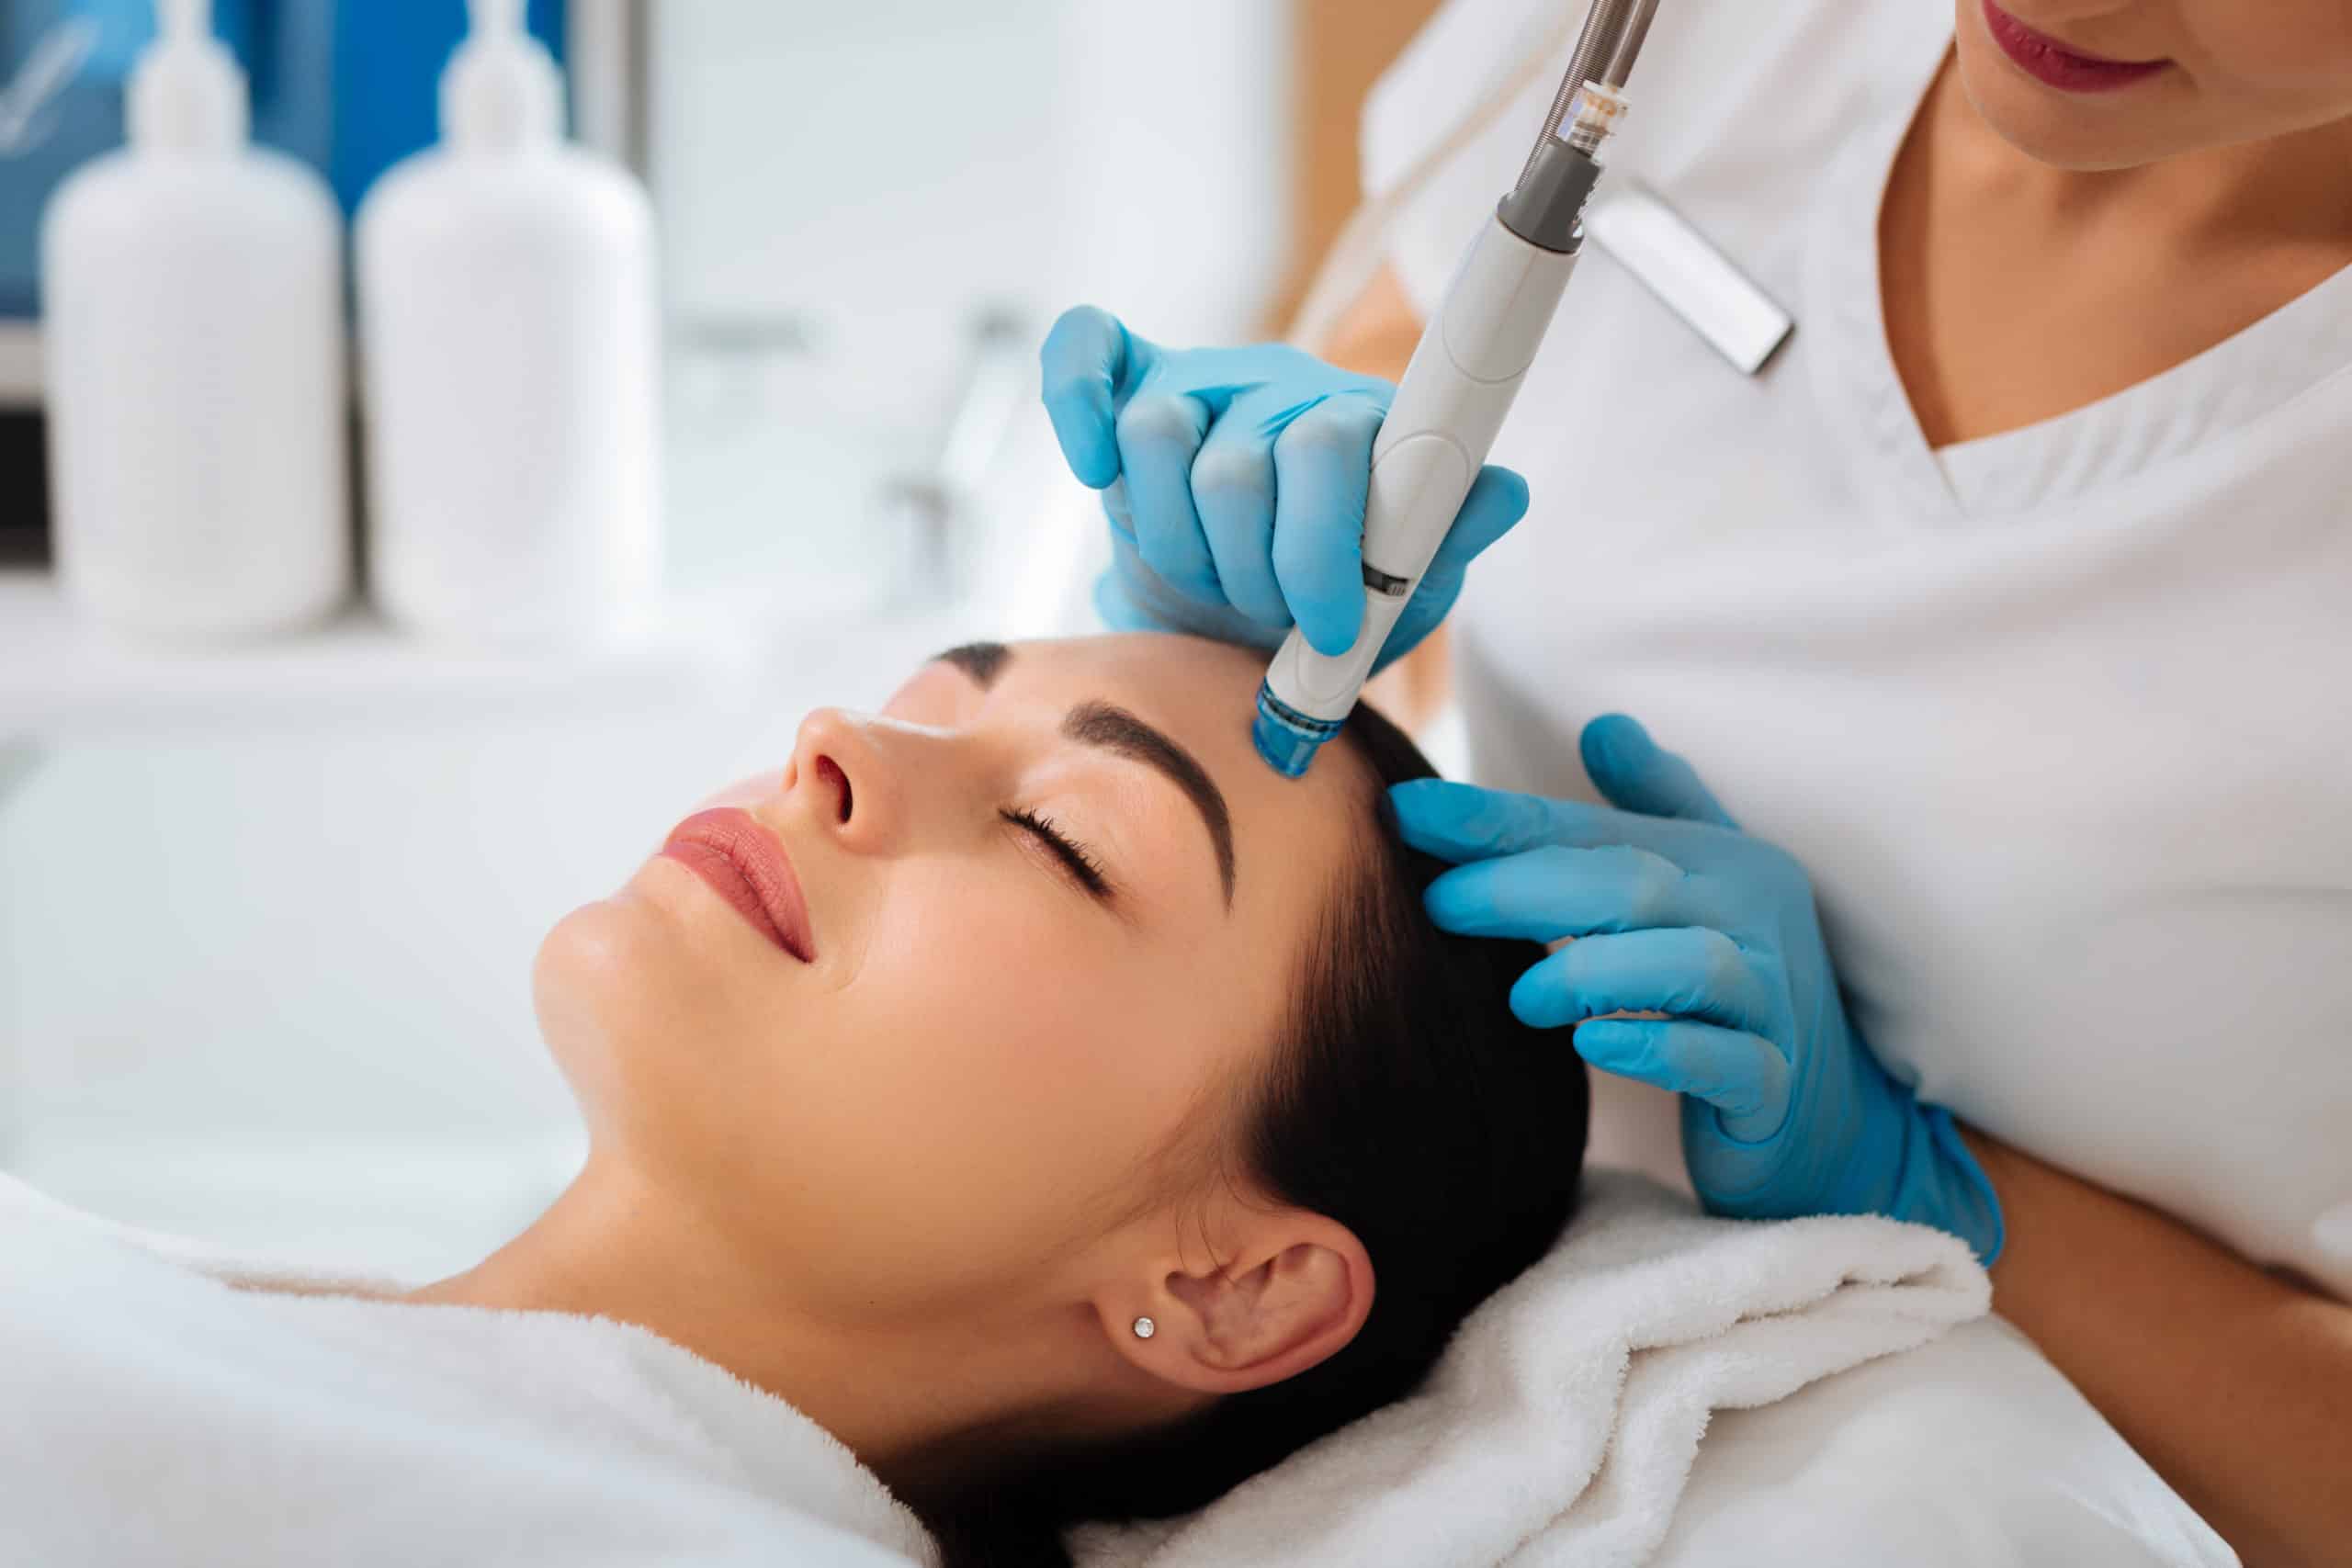 HydraFacial - 3 Steps. 30 Minutes. The Best Skin of Your Life